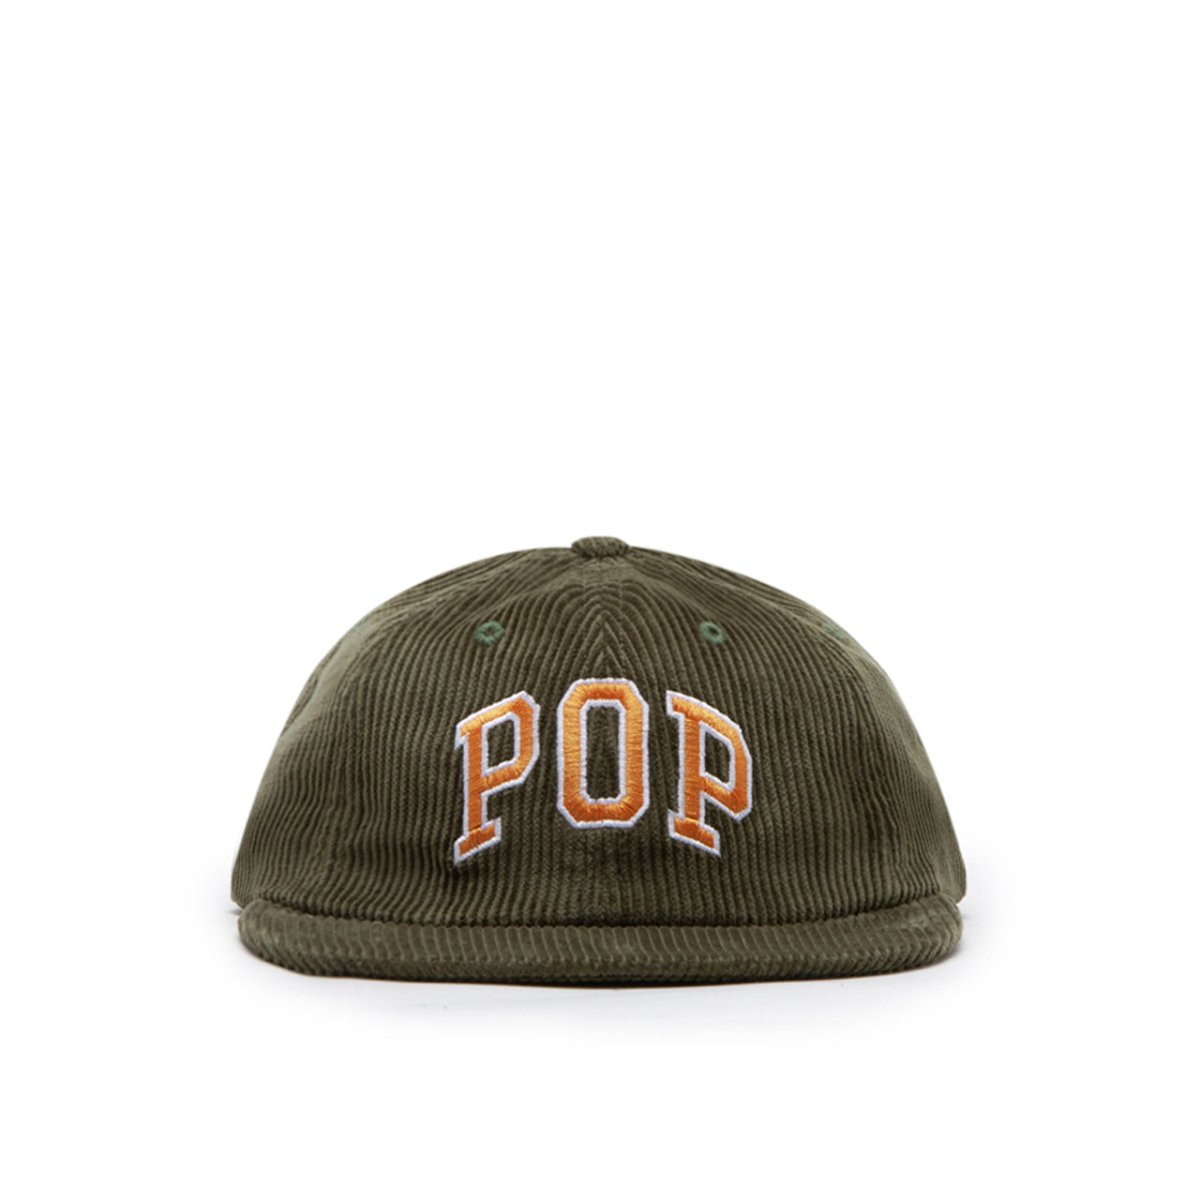 Pop Trading Company Arch Sixpanel Hat (Oliv)  - Allike Store